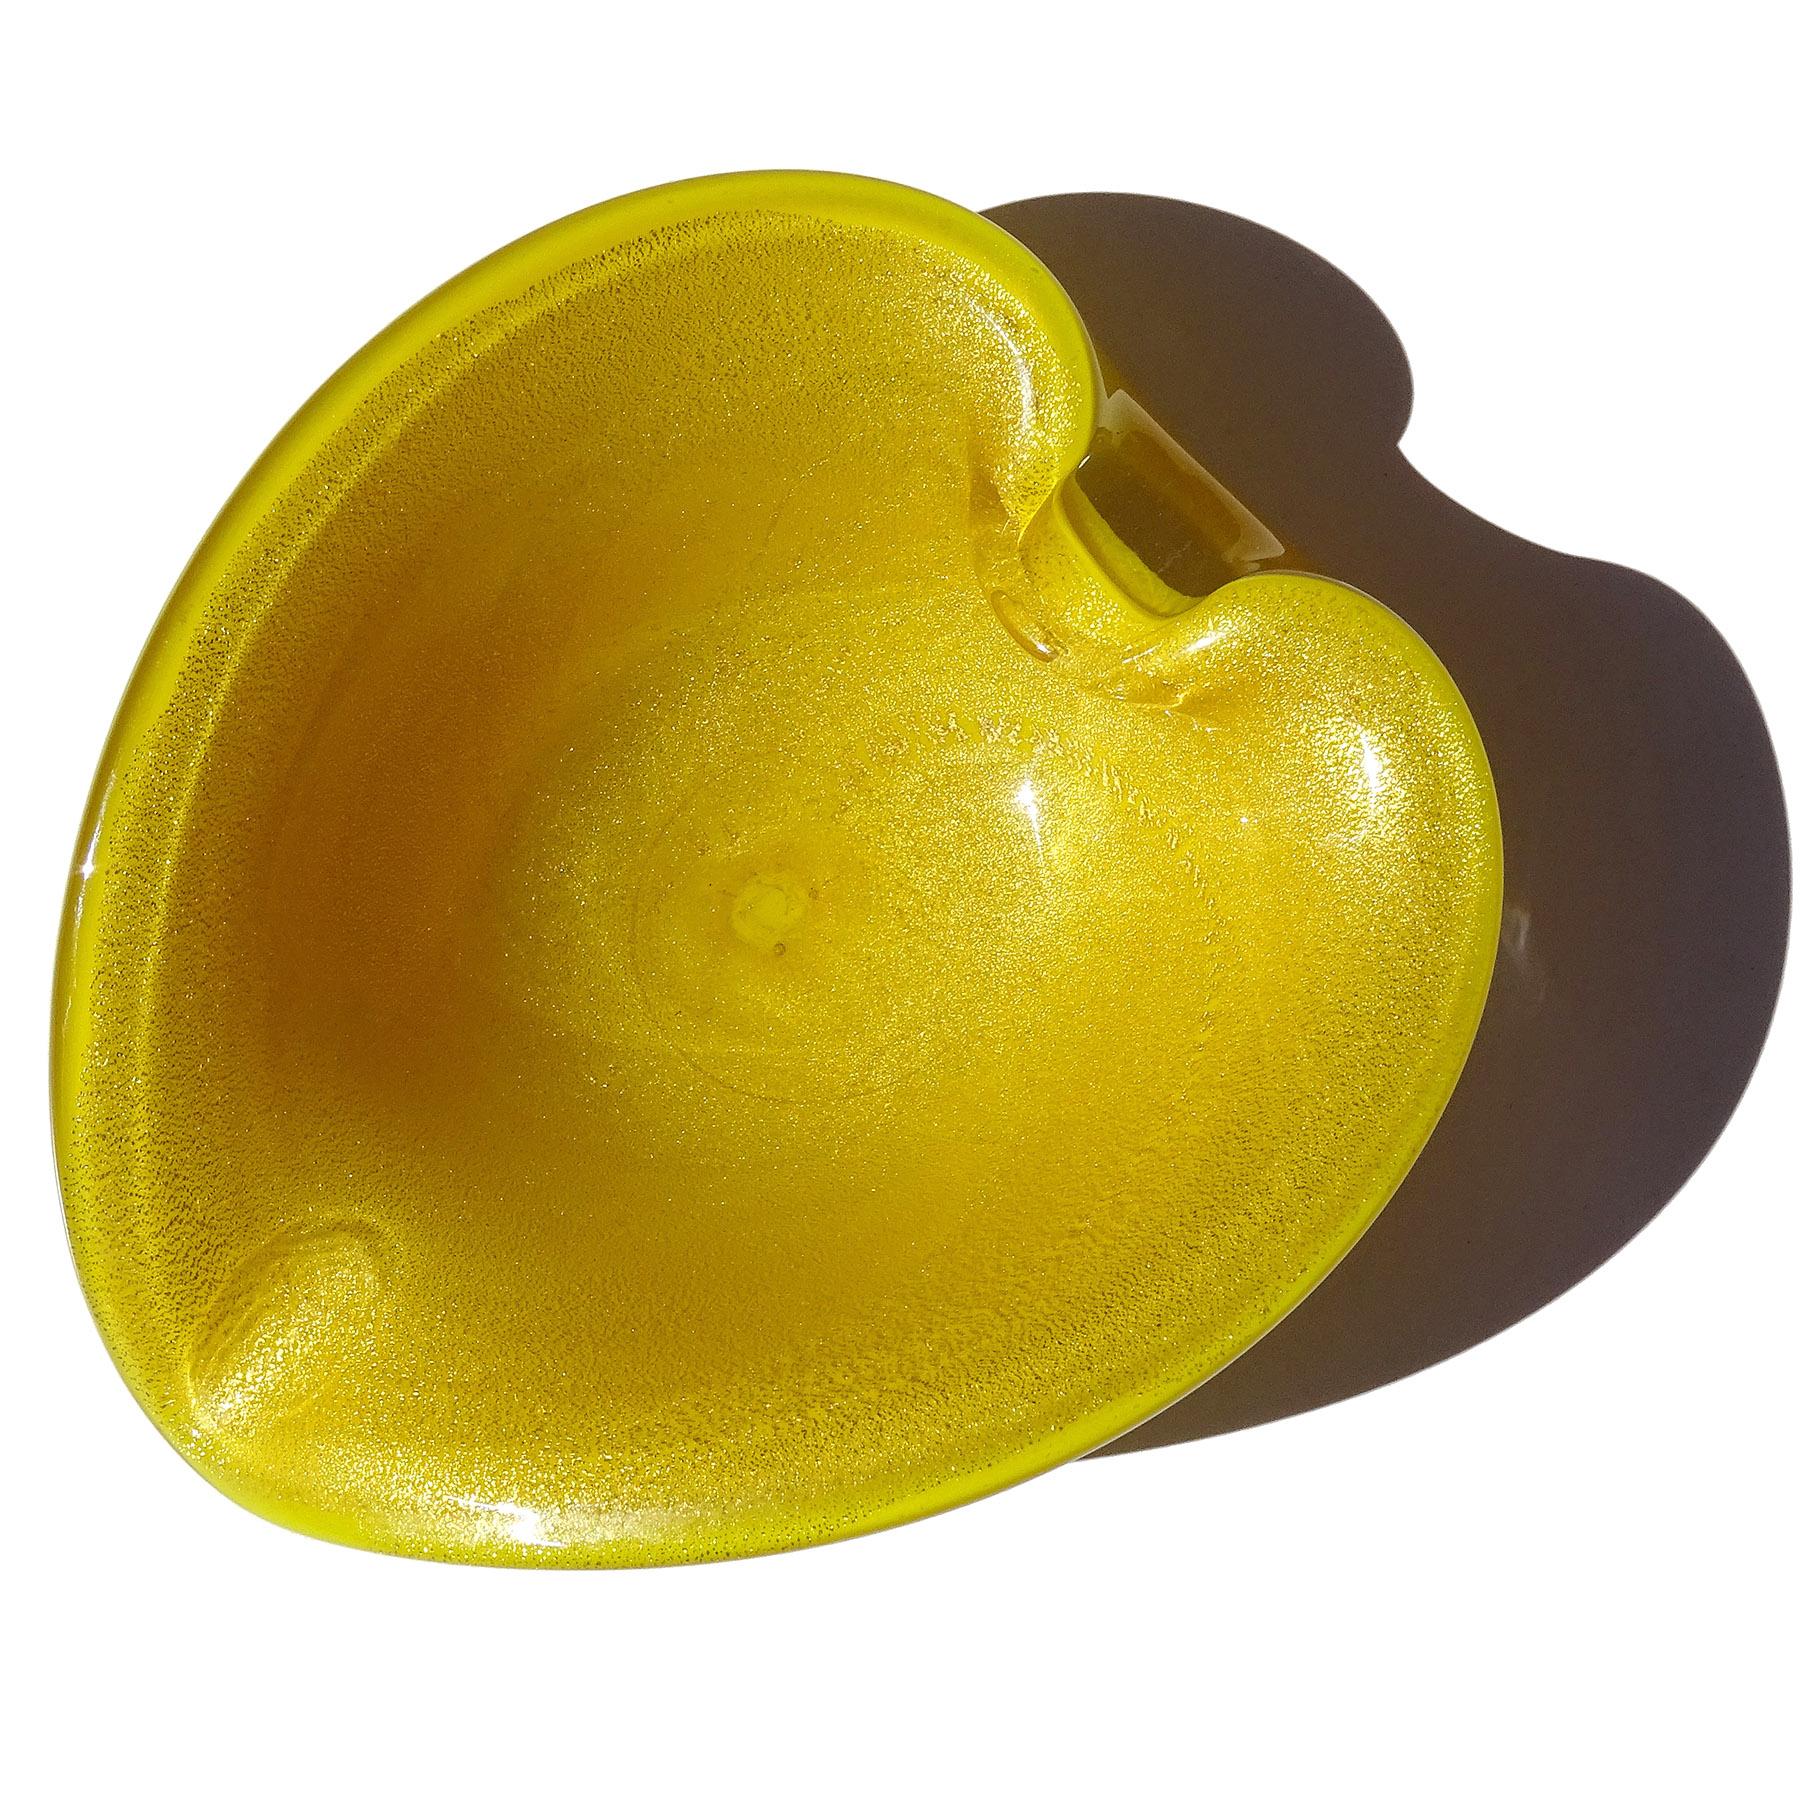 Beautiful vintage Murano hand blown bright yellow and gold flecks Italian art glass heart shaped bowl / vide poche. Attributed to designer Alfredo Barbini. The bowl I made with a golden sunflower yellow and it is profusely covered in heavy gold leaf